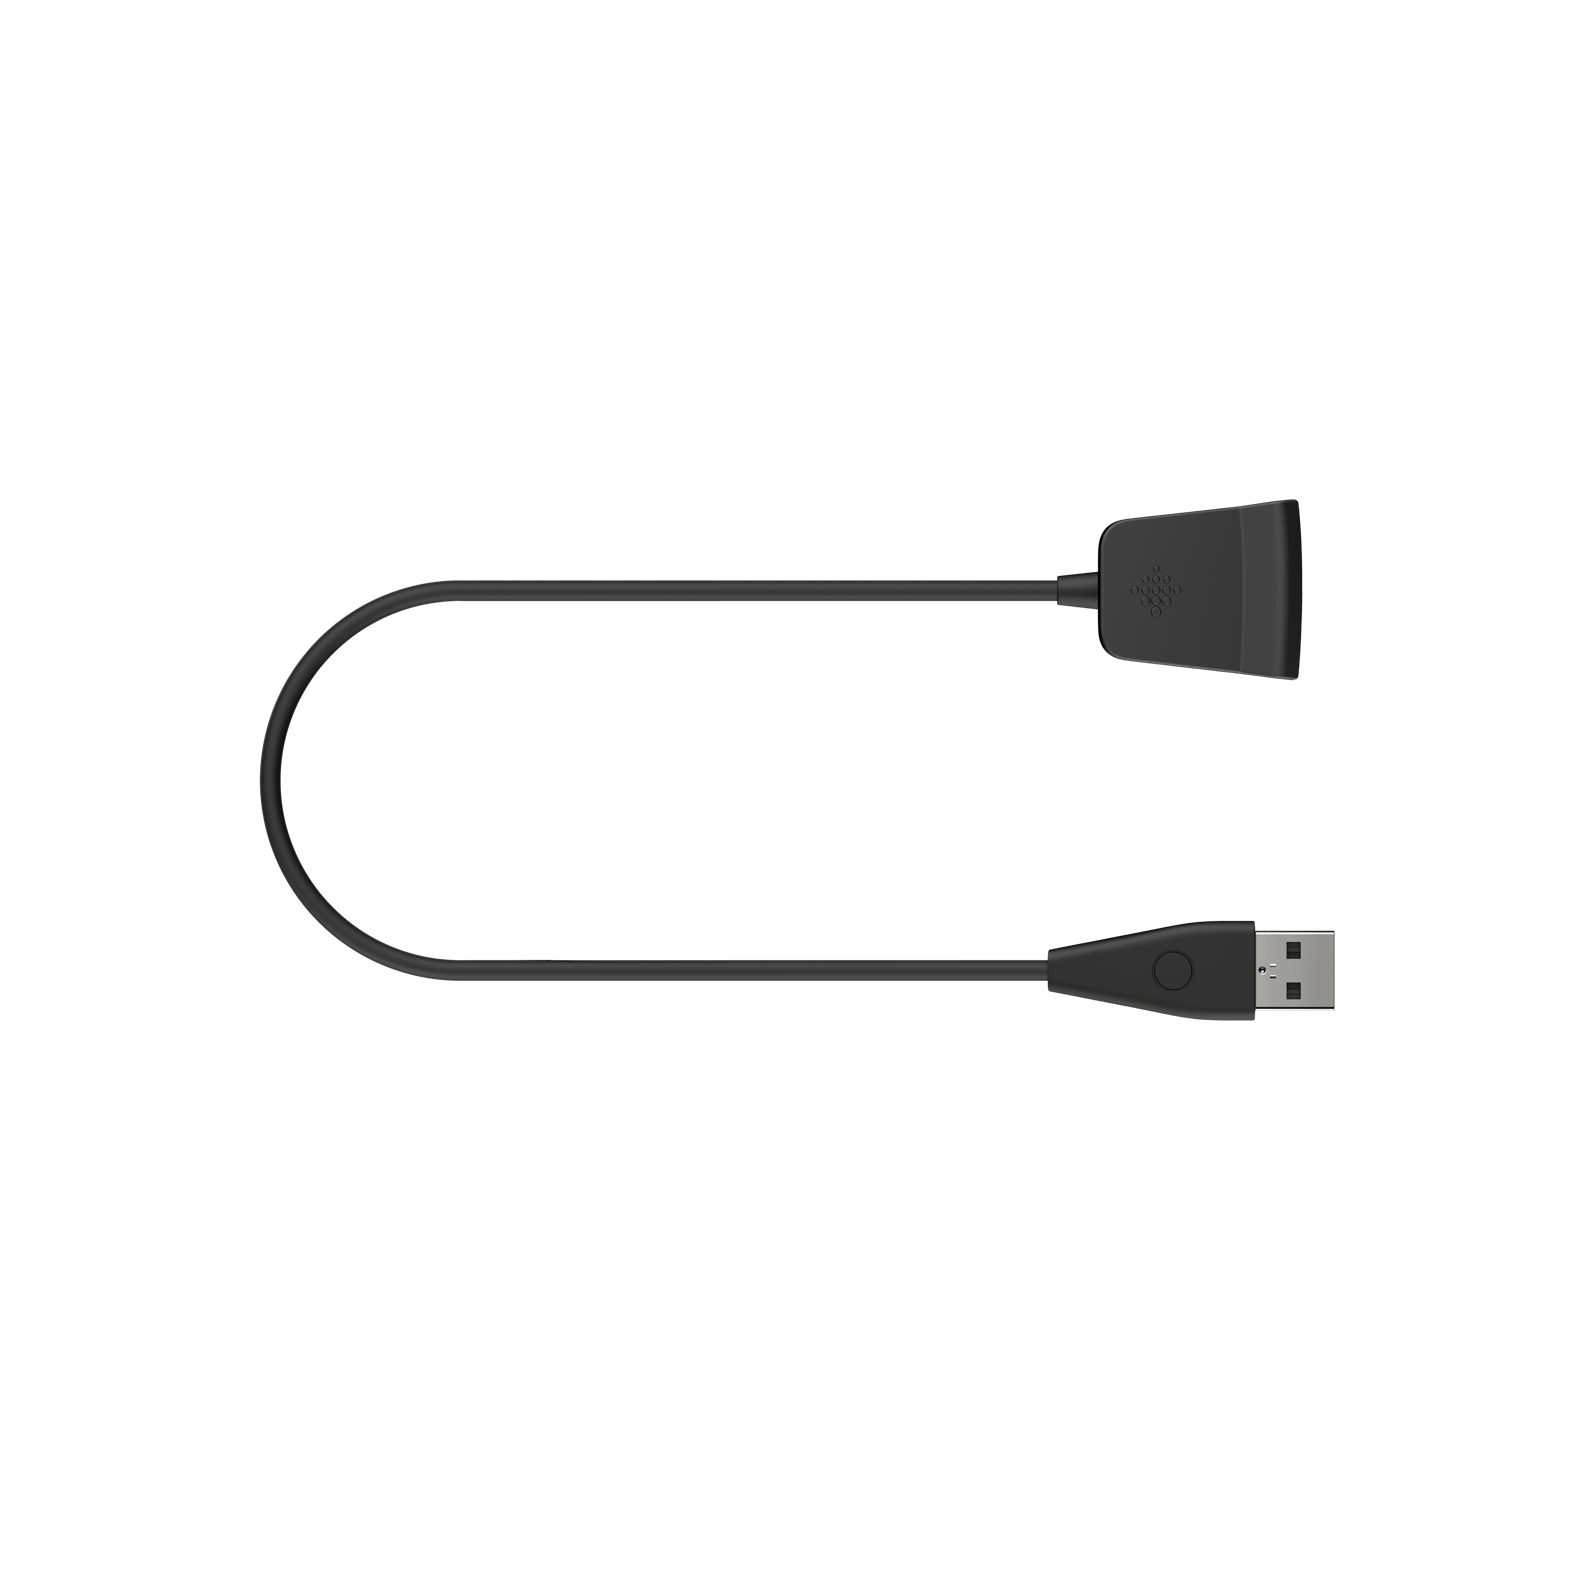 fitbit alta charger in store